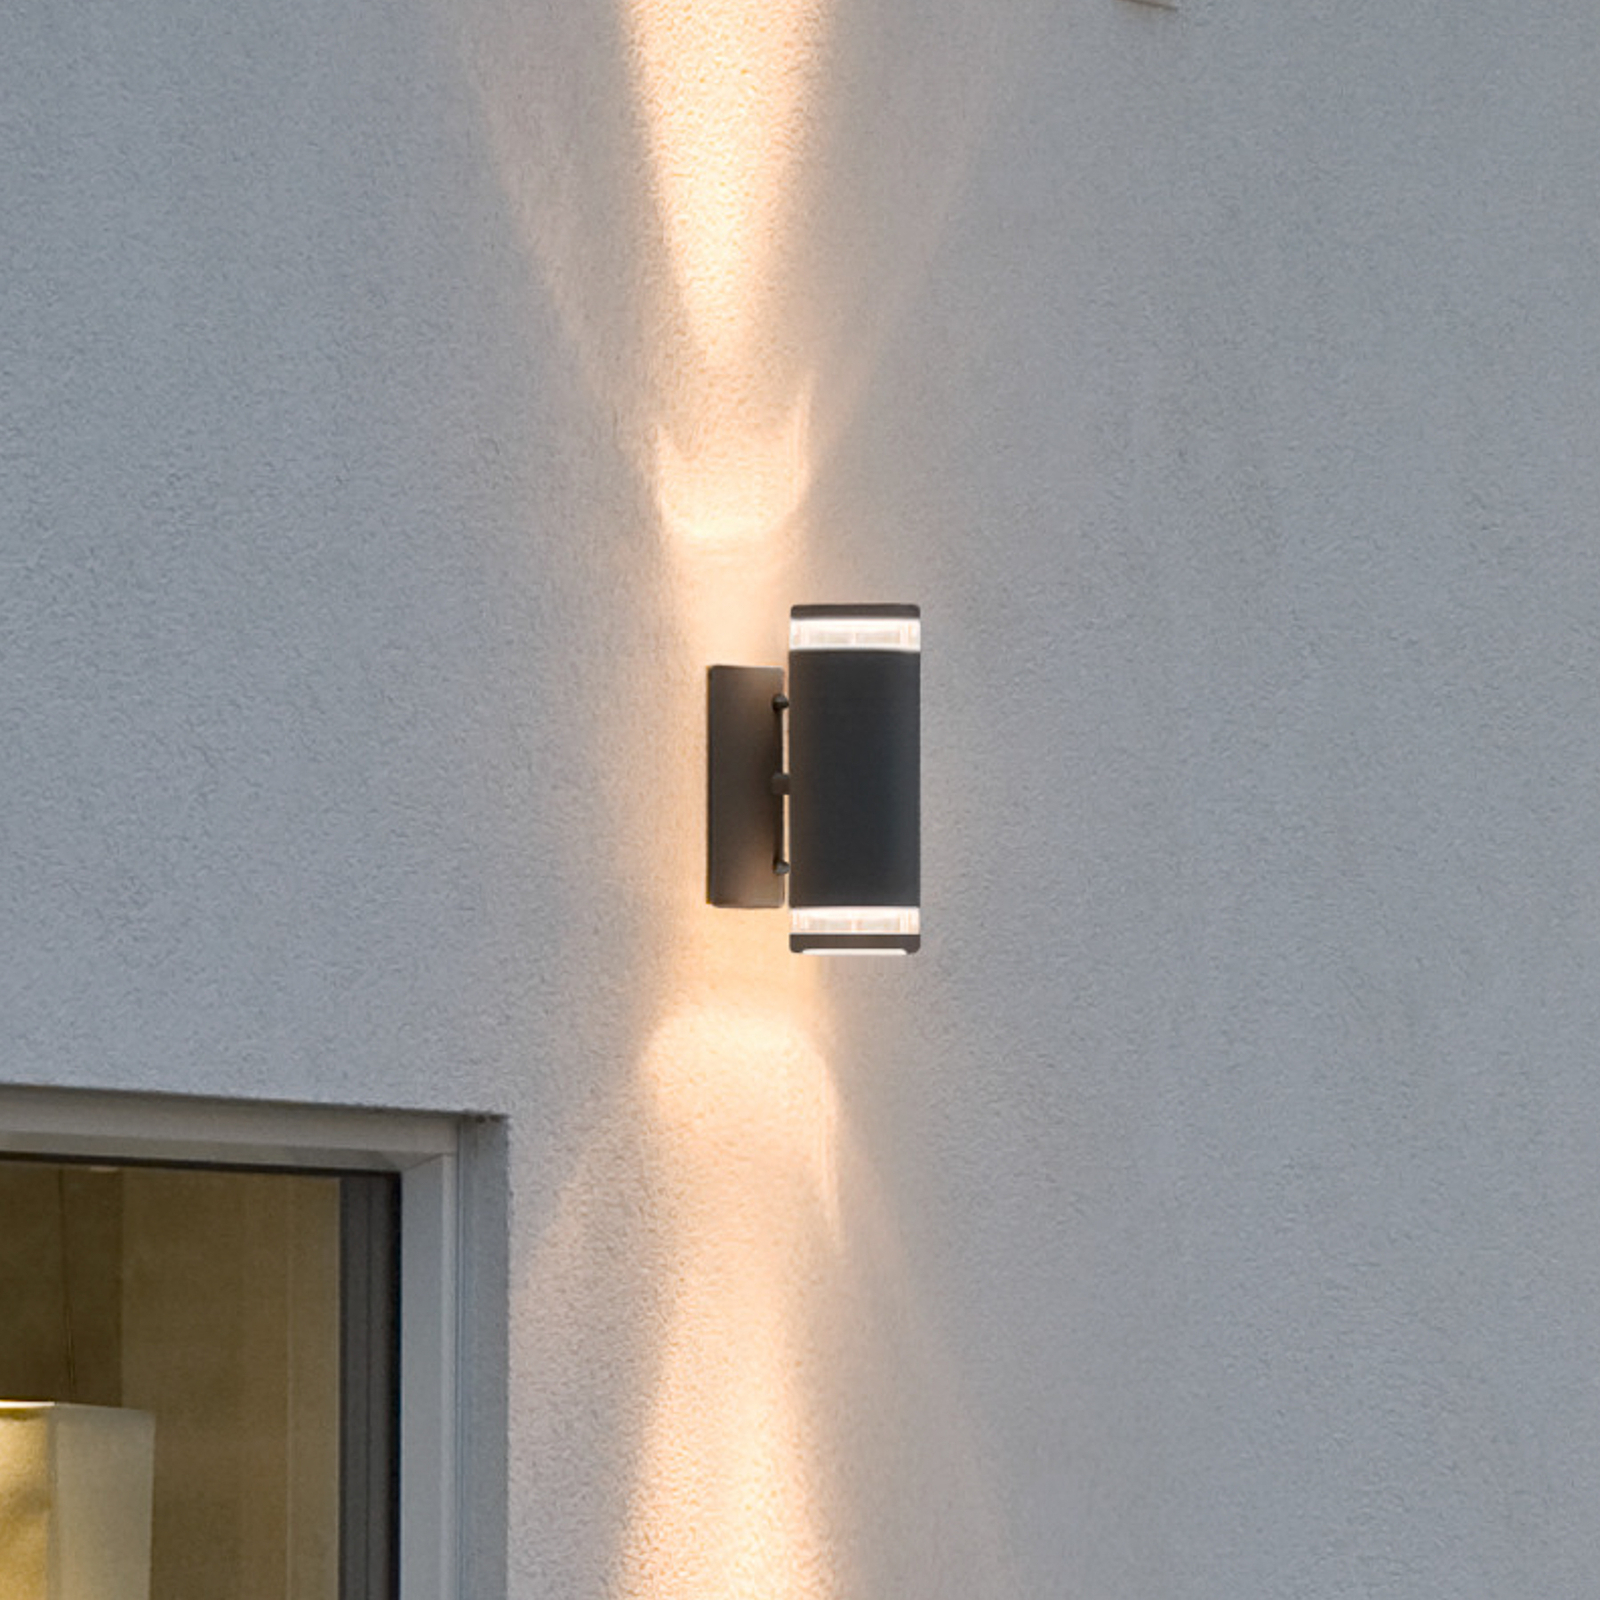 Modena outdoor wall light with slit, 2-bulb, black